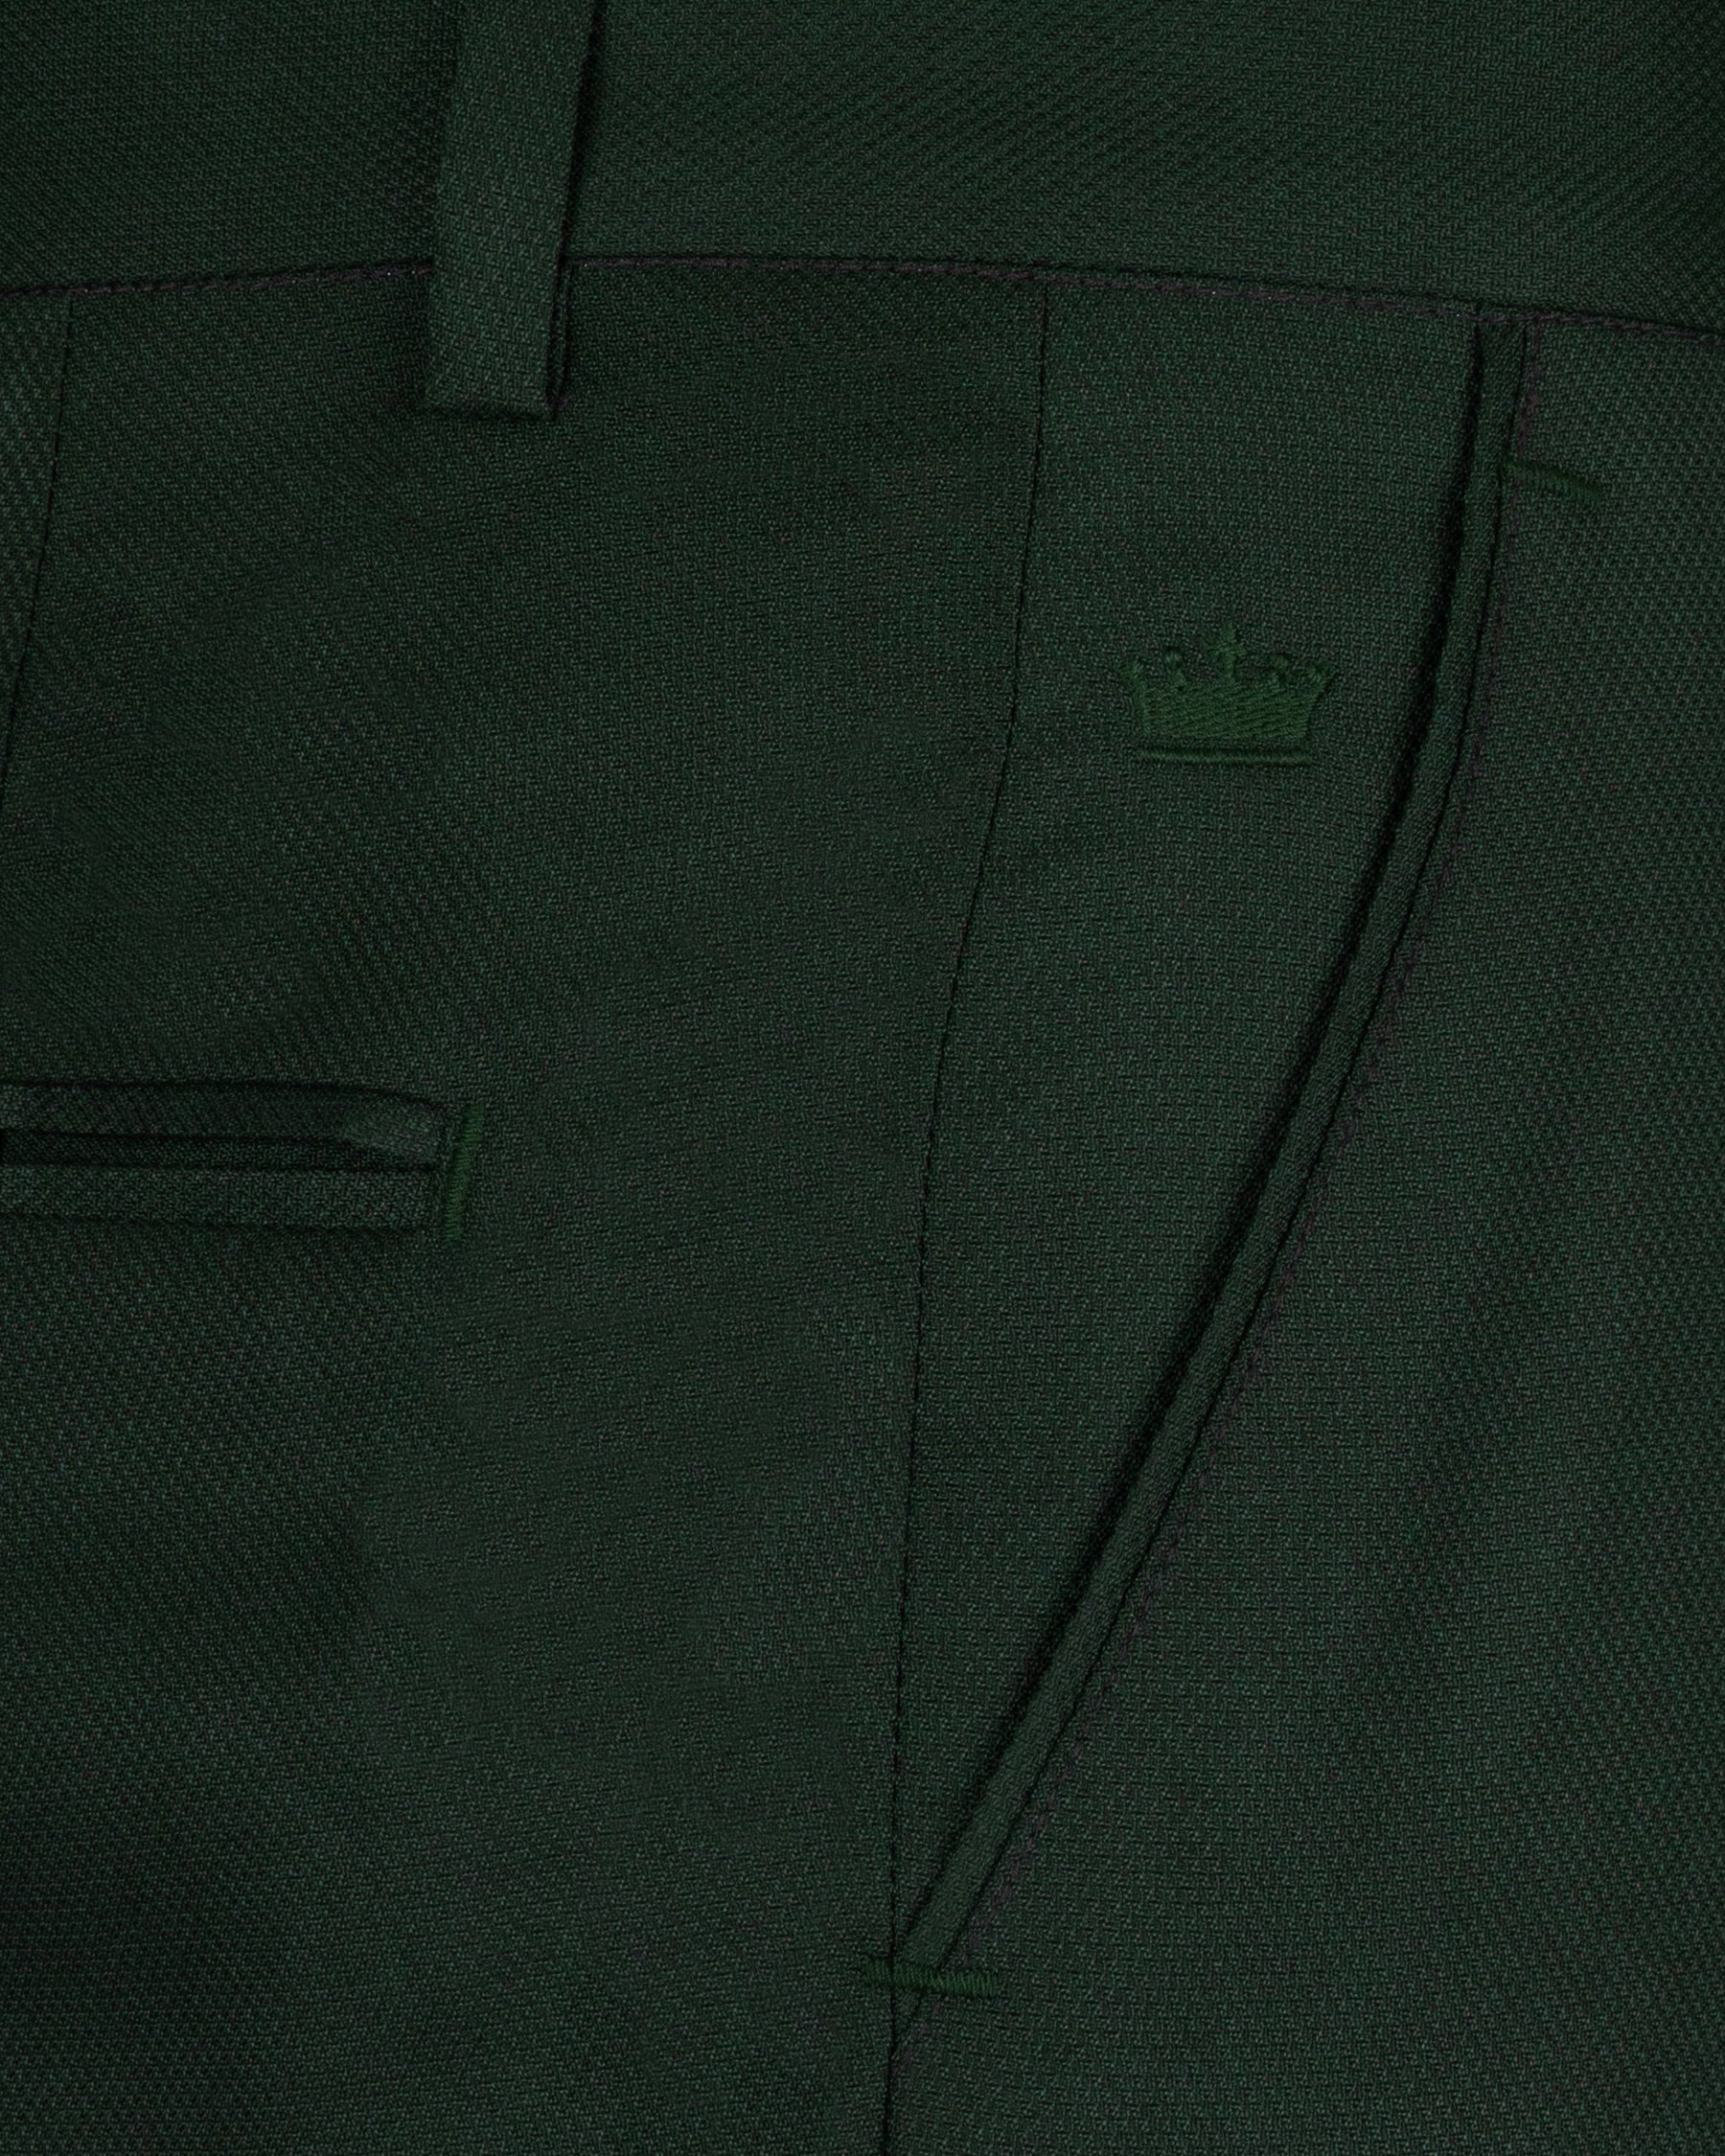 Celtic Green Textured Cross Placket Bandhgala Wool Rich Suit